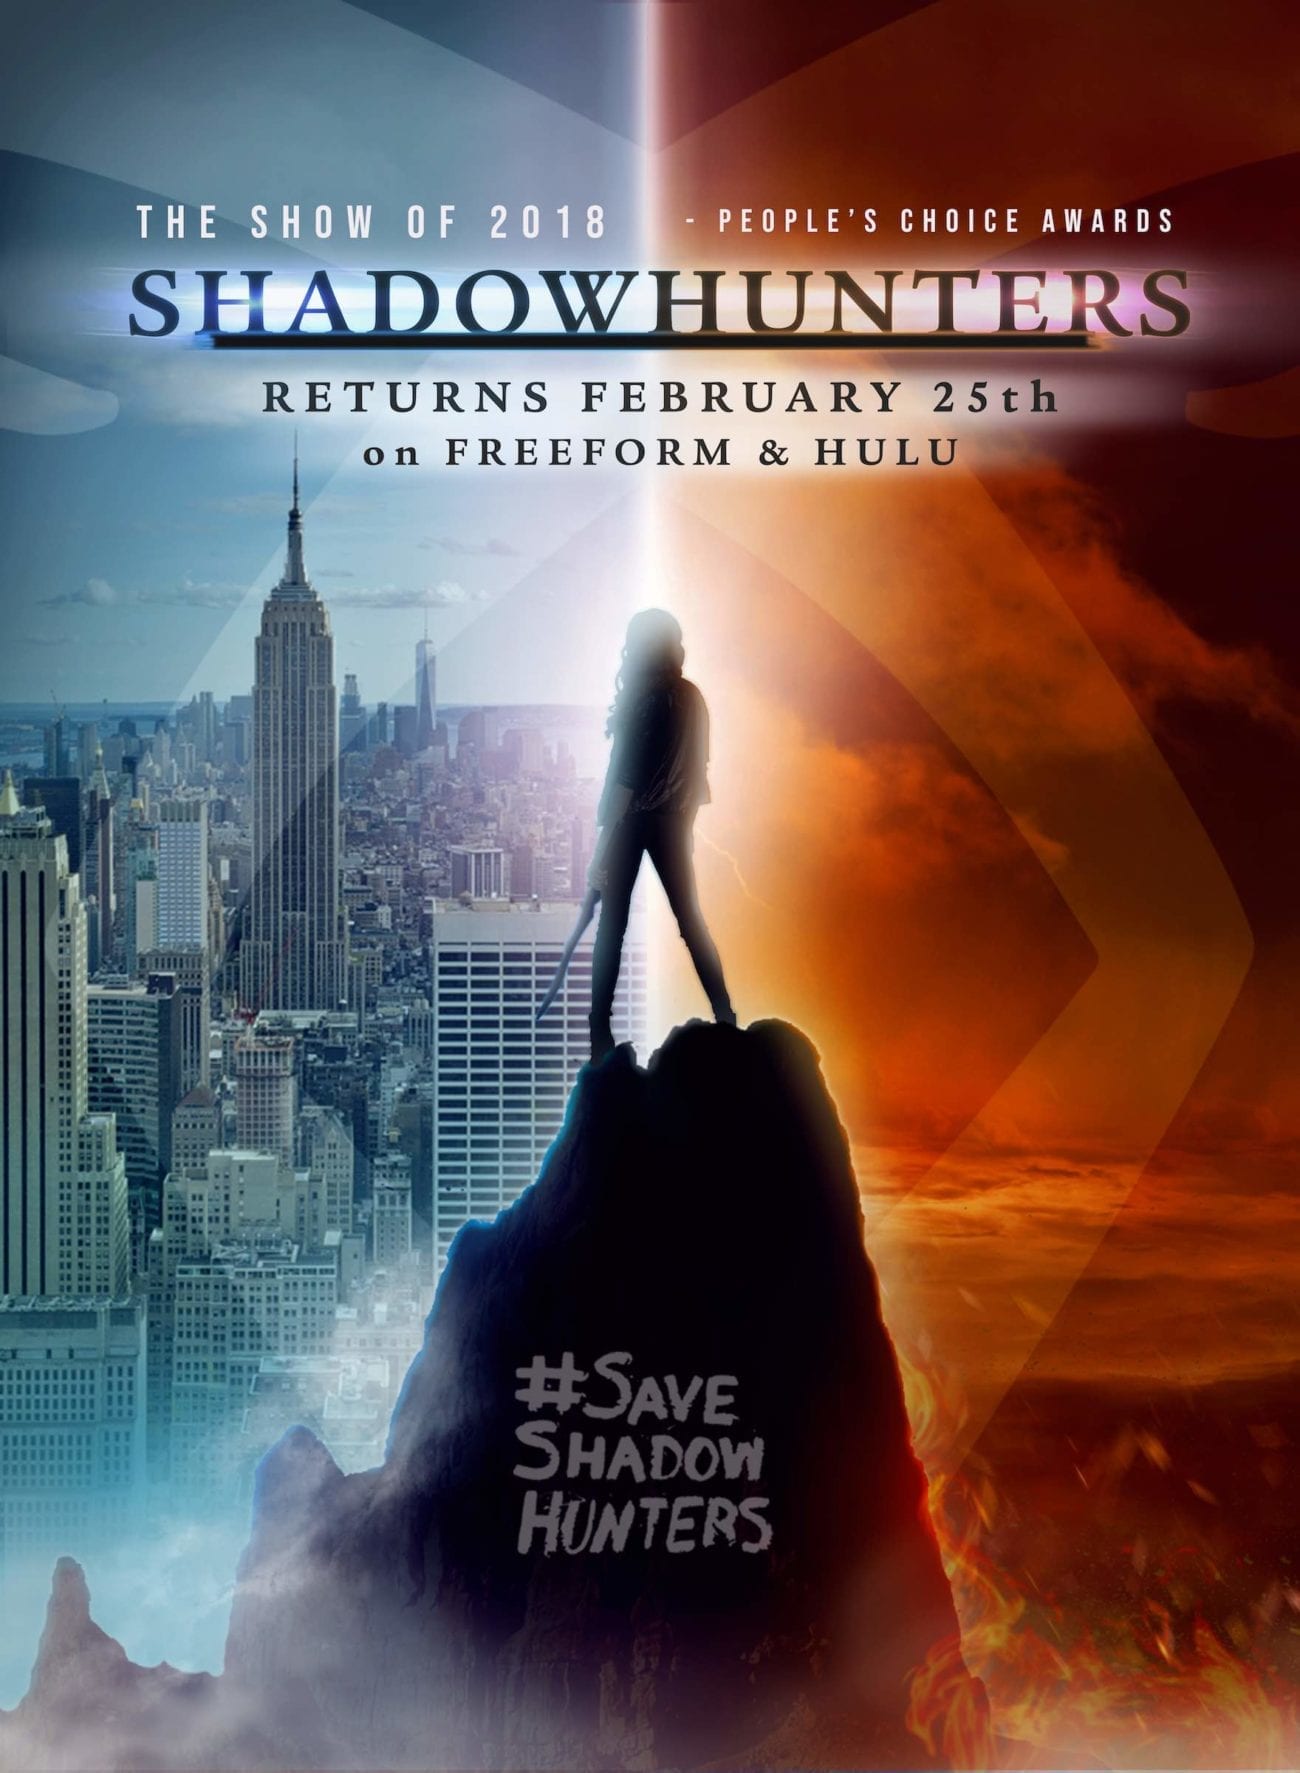 We’ve partnered with @BoomBitchesSH to help raise awareness around the historic marketing that the Shadowfam have been doing for 'Shadowhunters' season 3B.